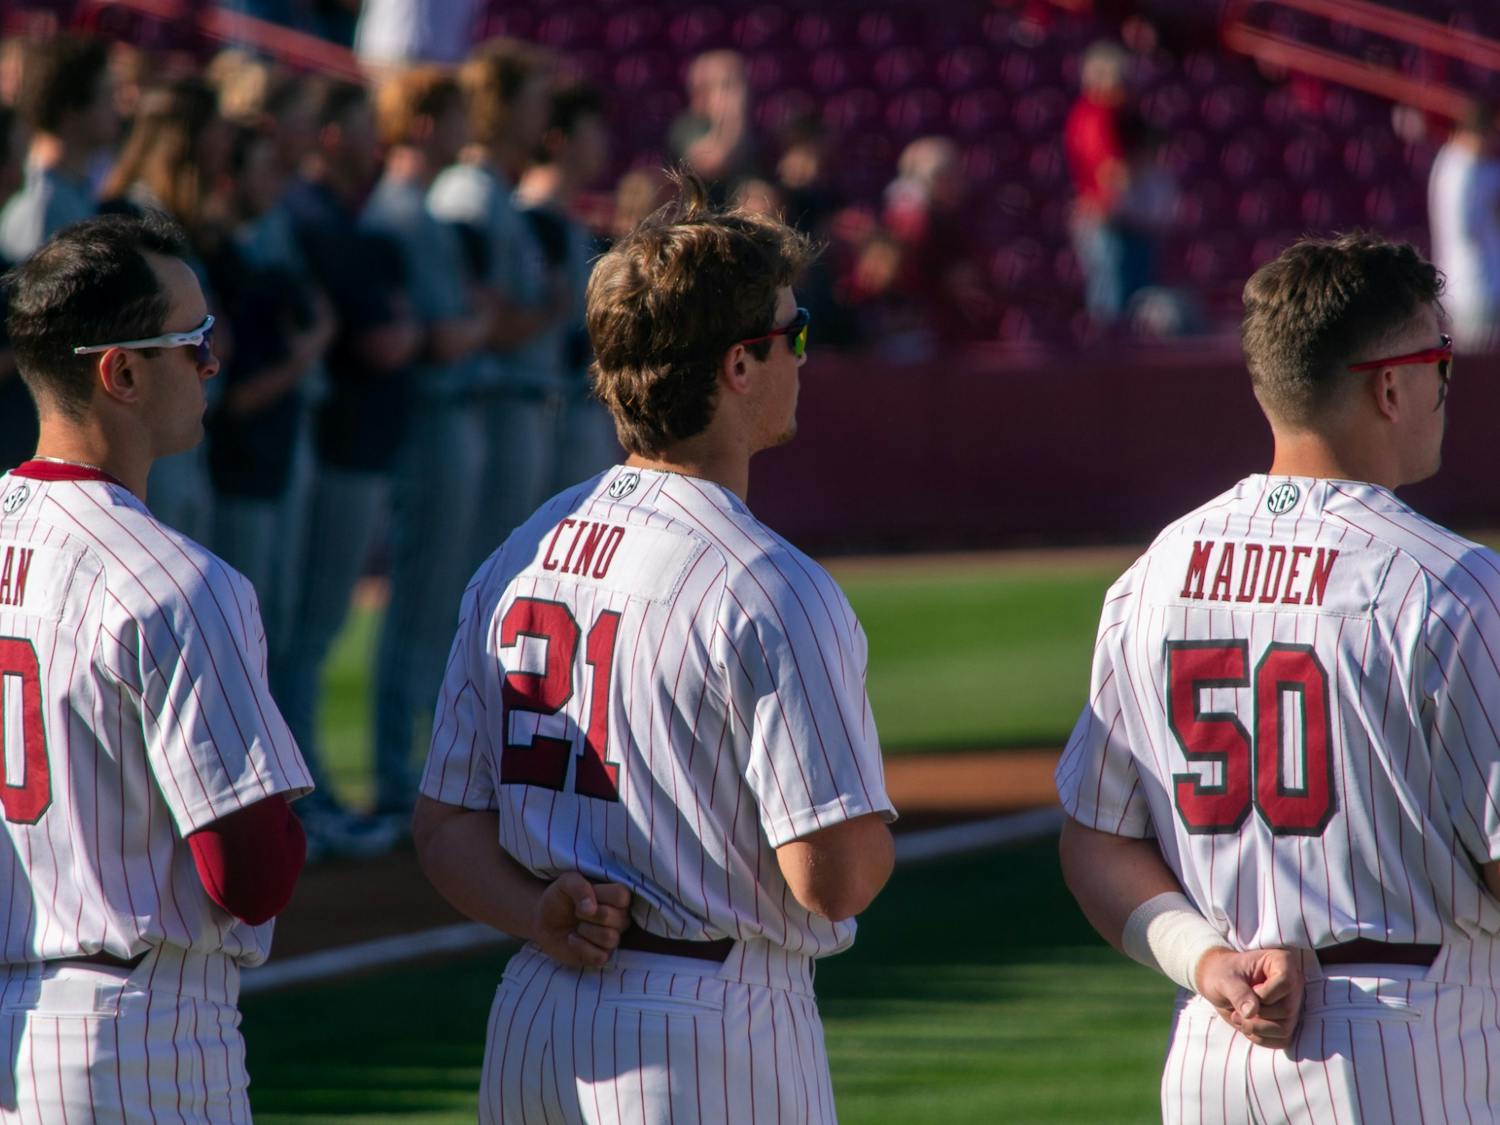 Carolina baseball team members Matt Hogan, Connor Cino, and Kevin Madden salute during the playing of the national anthem on Feb. 18, 2022. The Carolina Gamecocks won the first game in their series against UNCG 9-7.